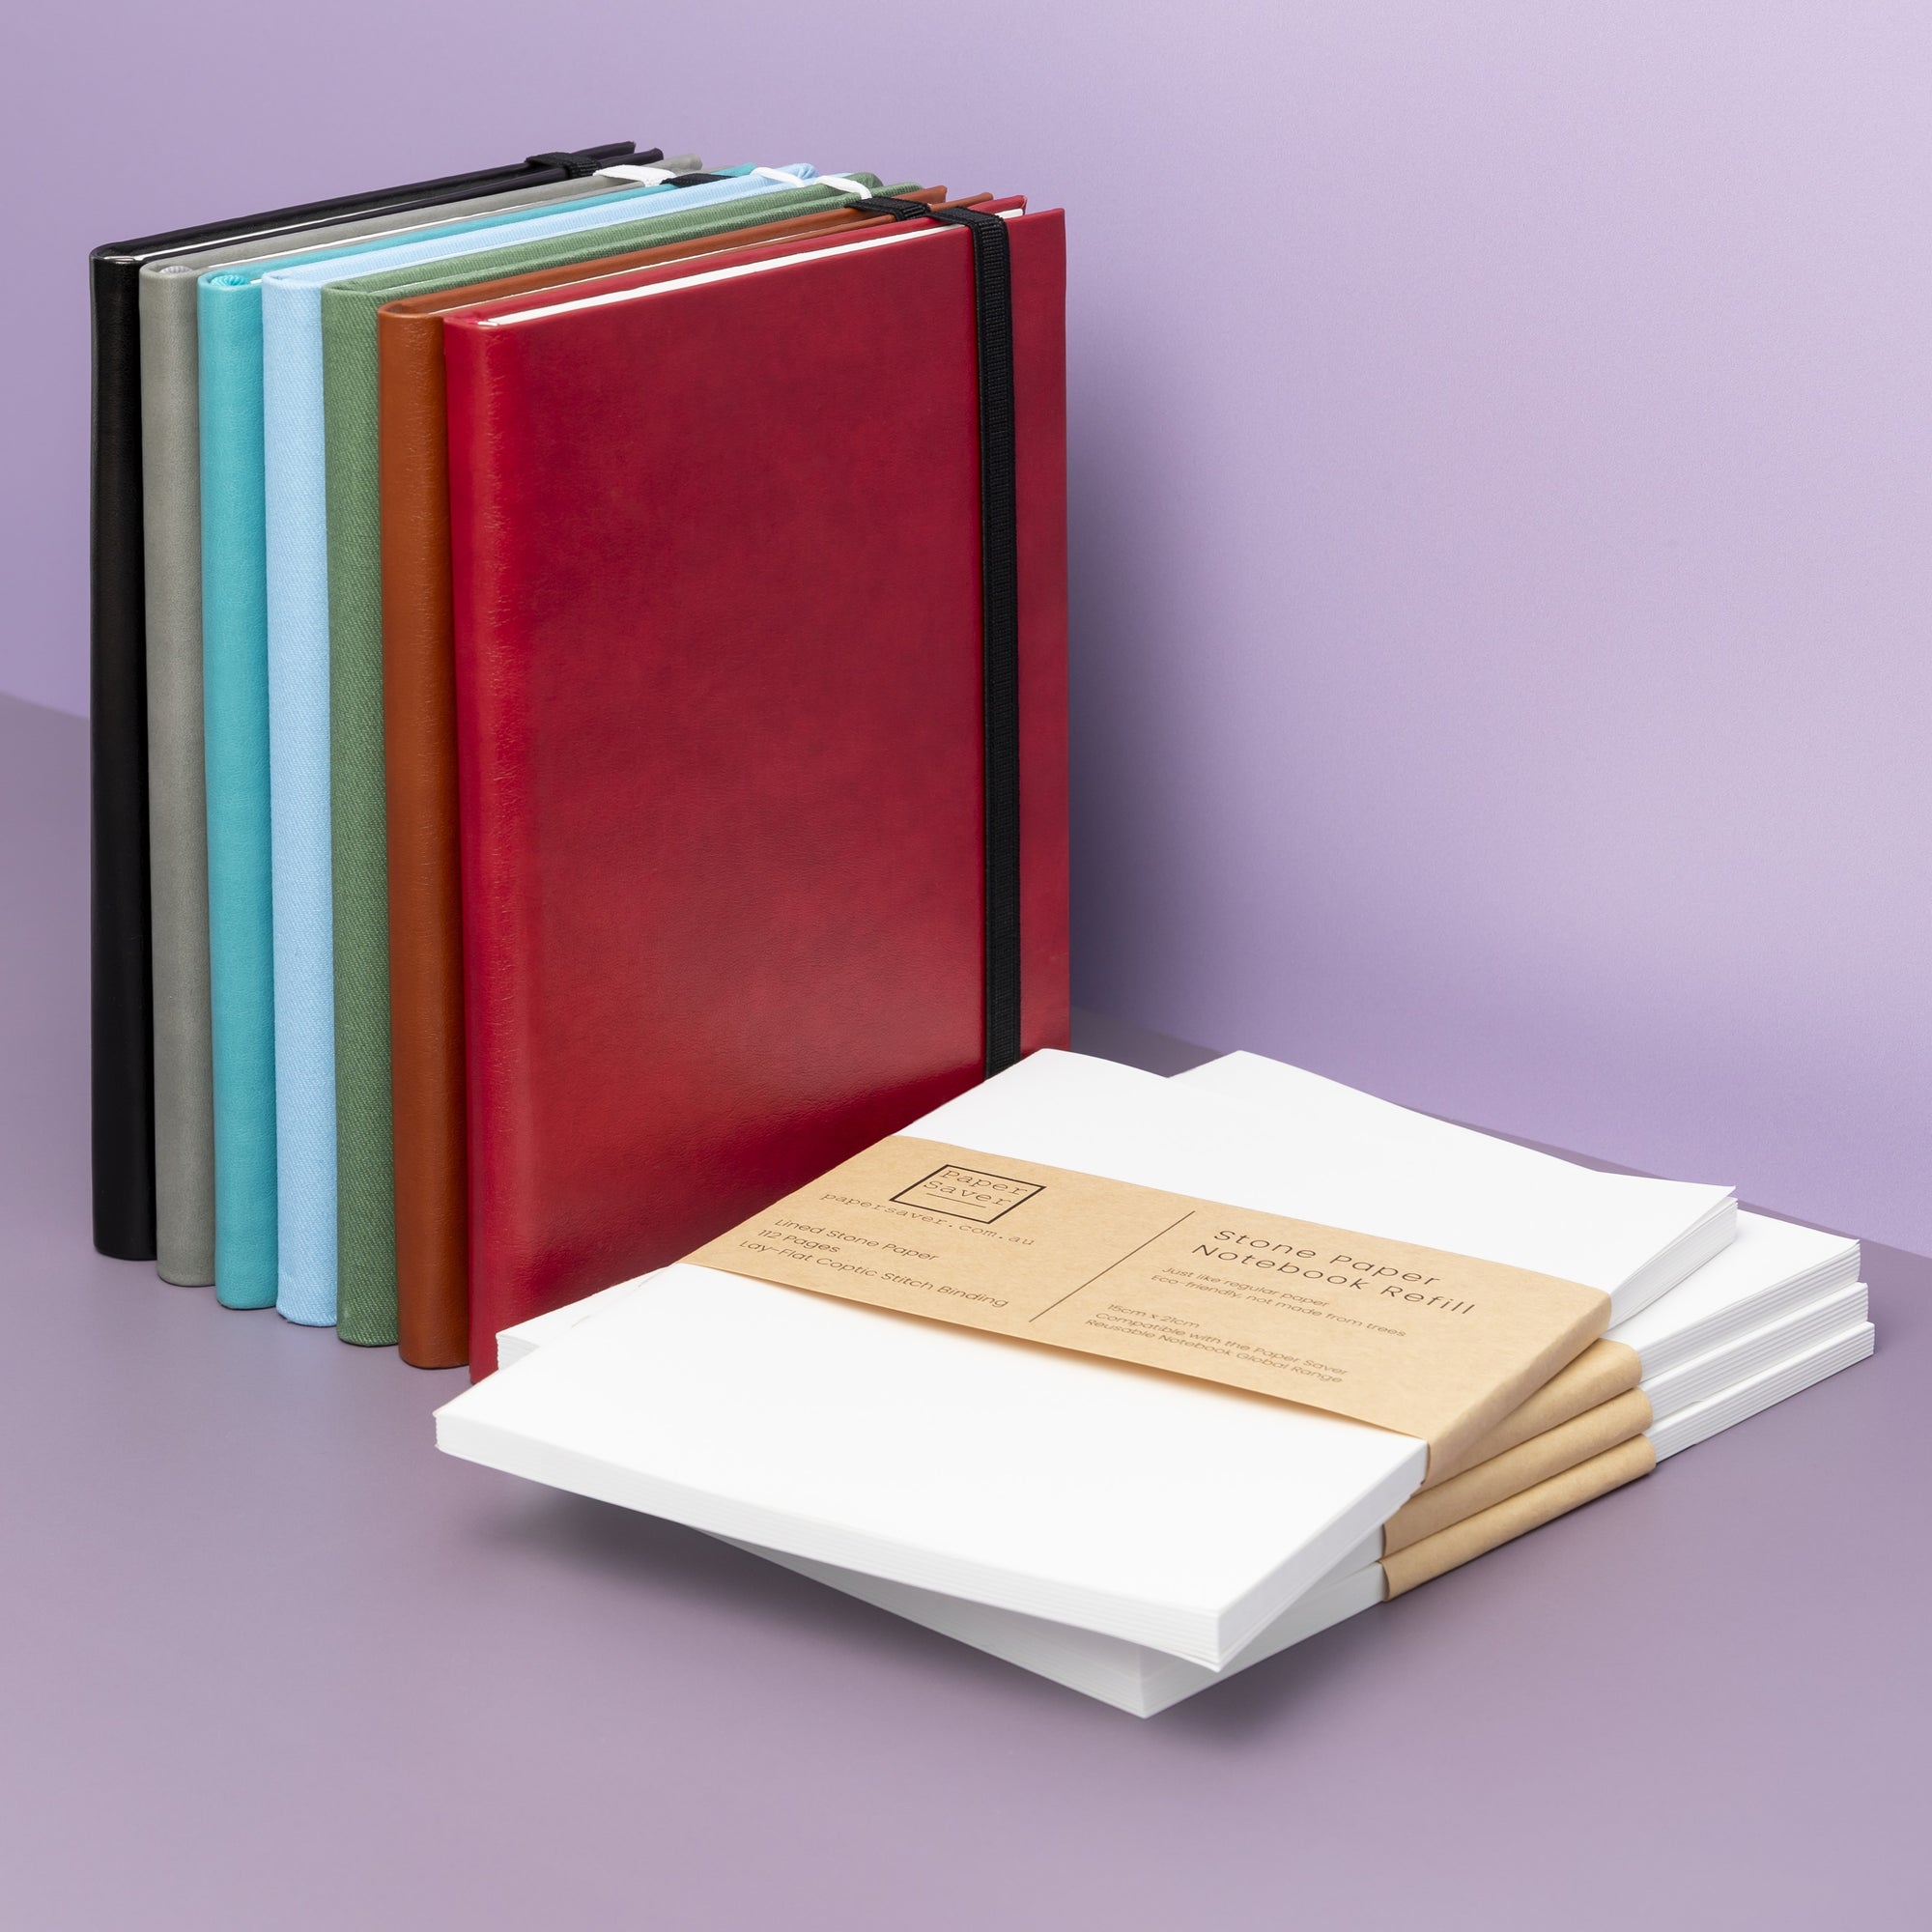 Refill the Paper Saver Reusable Notebook for a less wasteful way to write notes or sketch ideas, with Stone Paper or your used paper, repurposed as notebook pages.